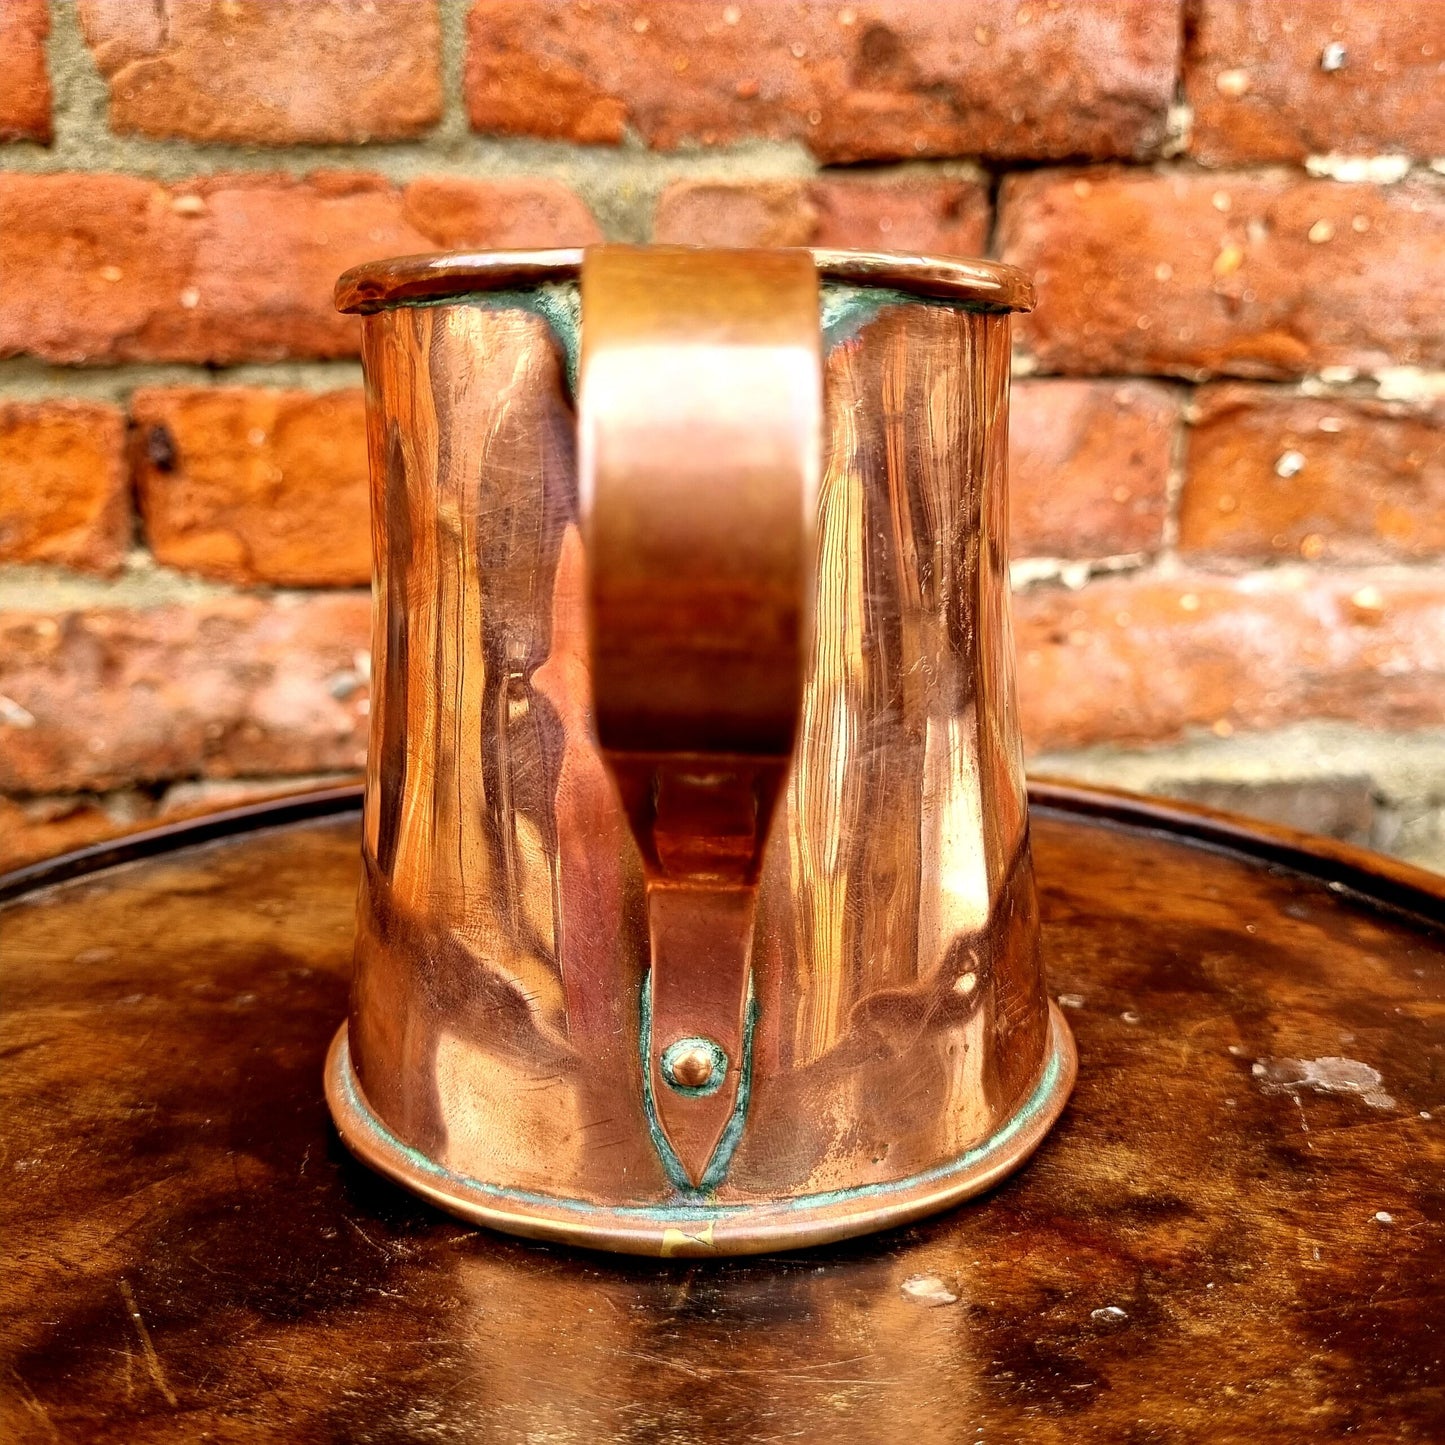 18th Century English Antique Copper Tankard or Measure Dated 1784